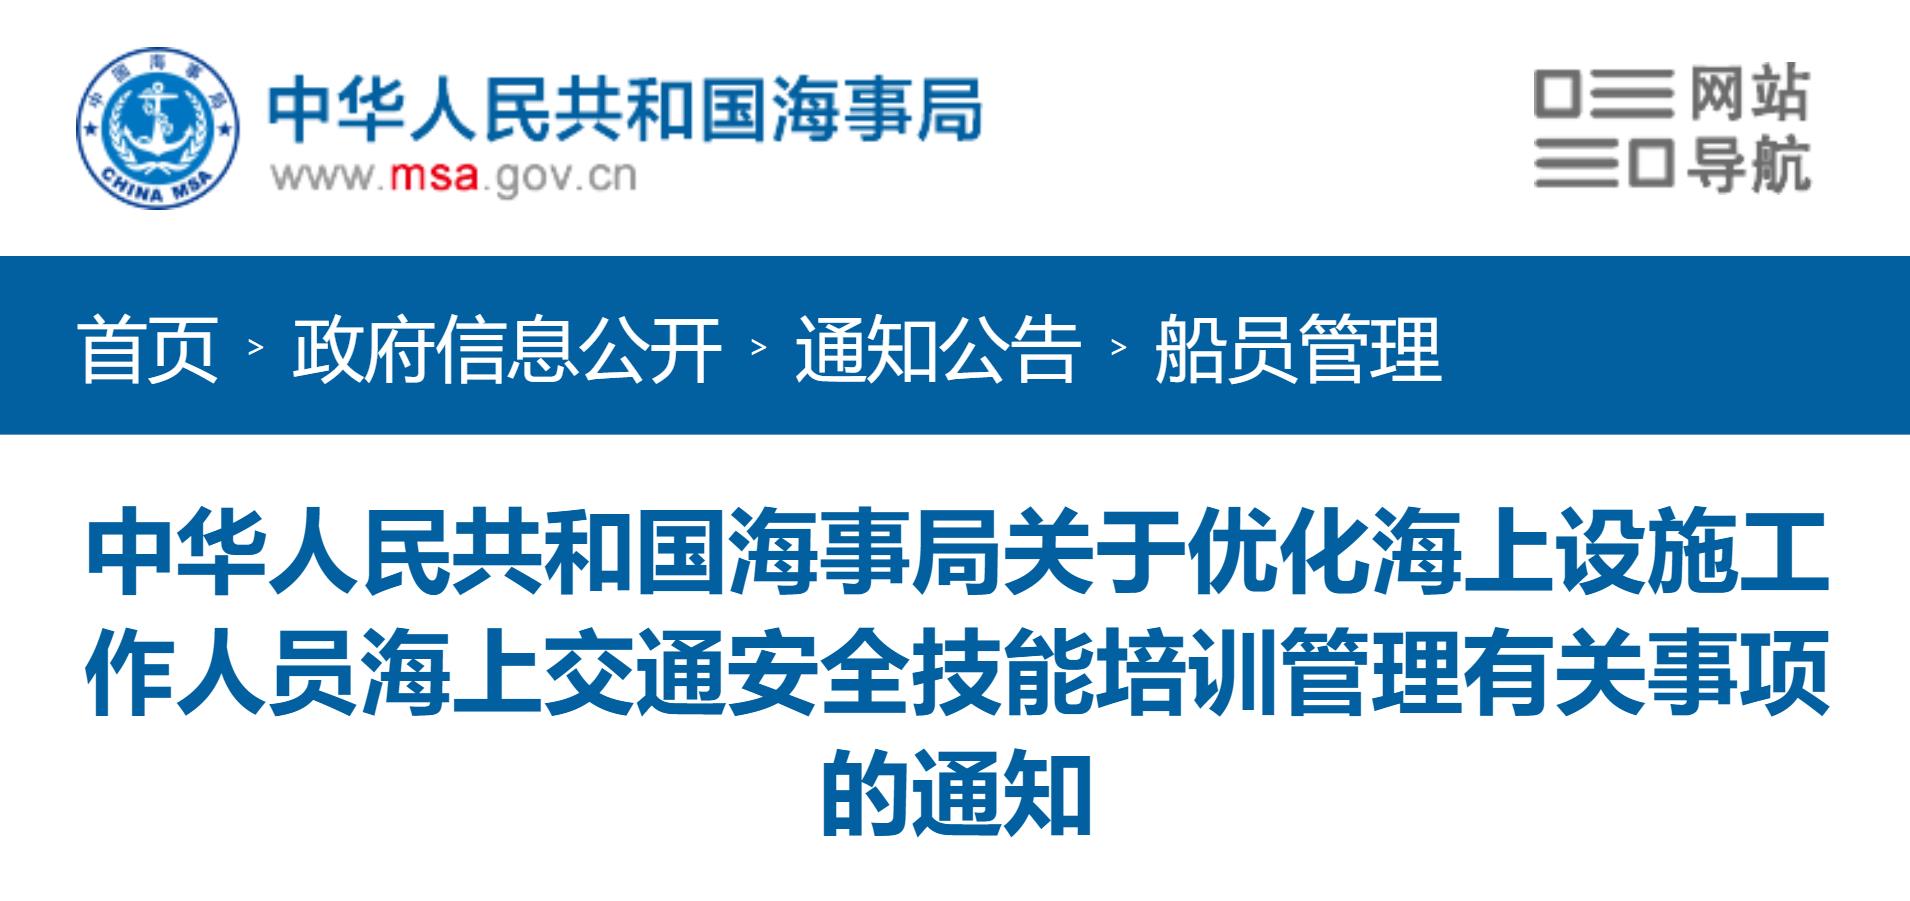 Notice of the Maritime Administration of the People's Republic of China on Matters related to the Optimization of Maritime Traffic Safety Skills Training for the Personnel of Maritime Installations